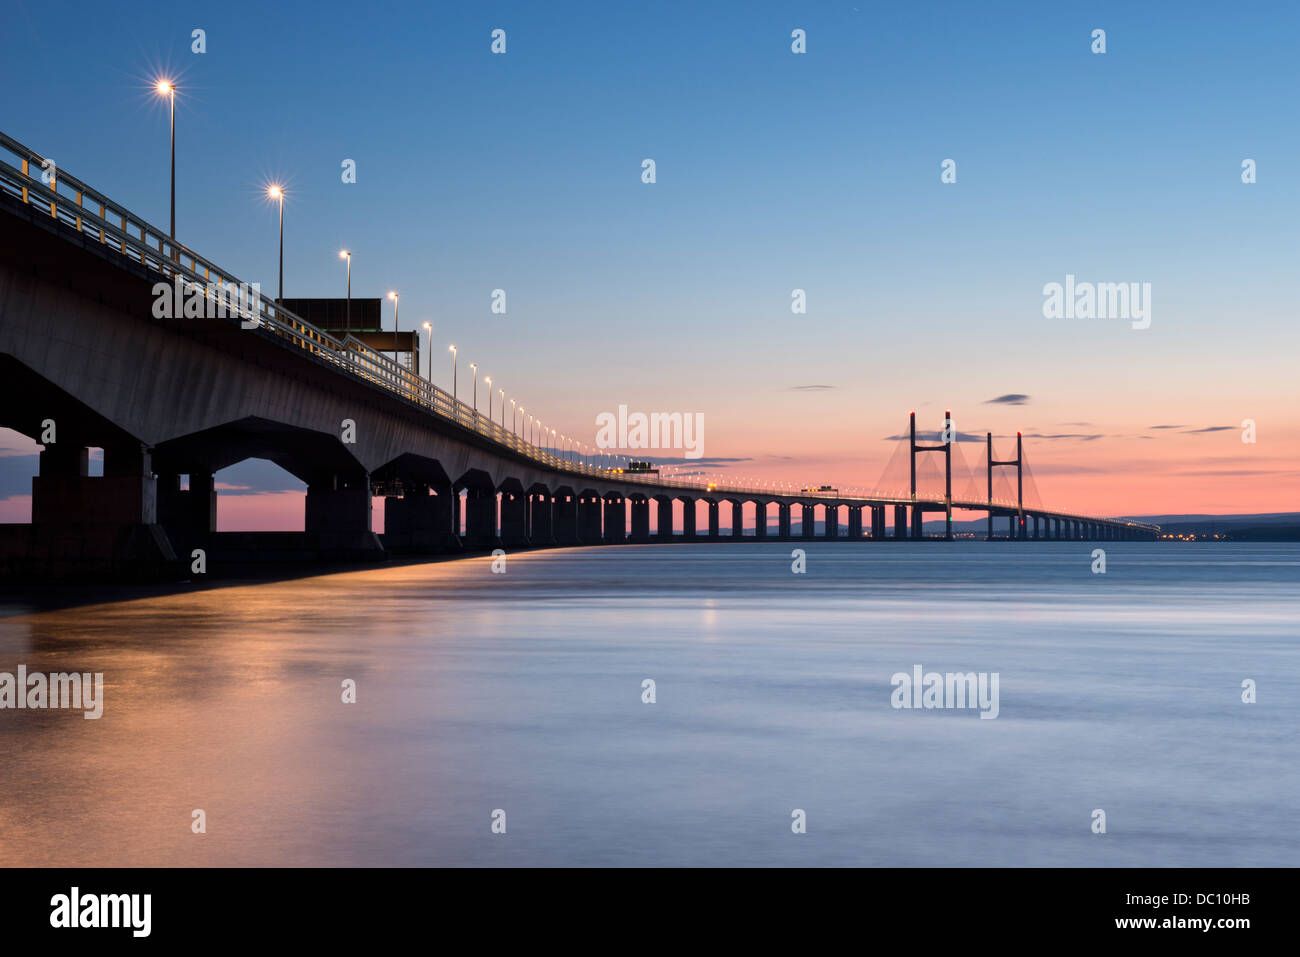 The Second Severn Crossing, carrying the M4 motorway, linking England and Wales, illuminated at dusk. Stock Photo